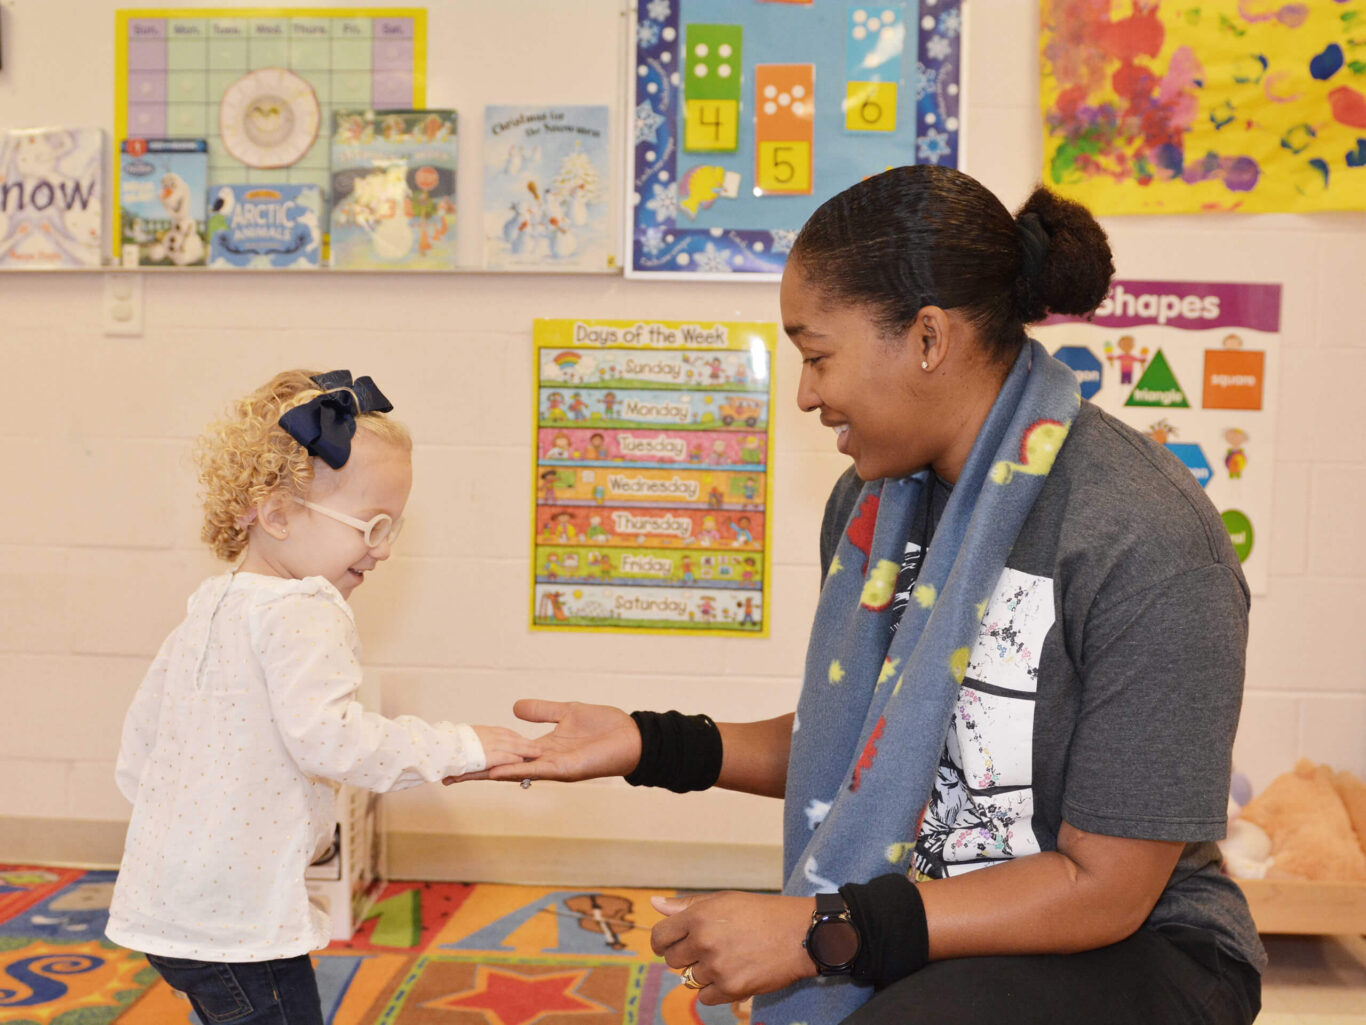 A woman is holding a little girl's hand in a preschool classroom.